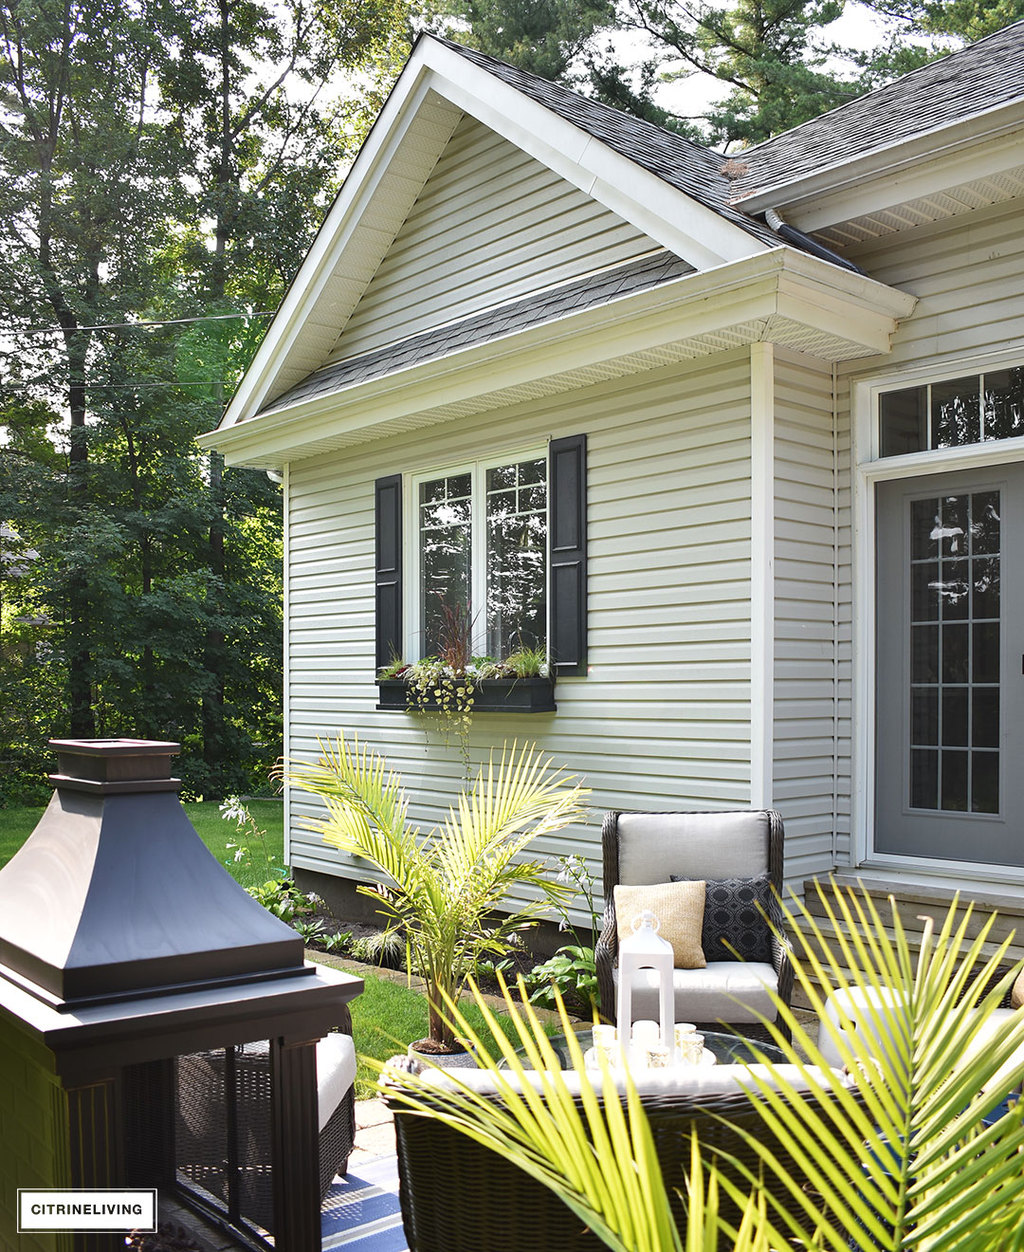 Home exterior with grey siding and roof, black shutters and window boxes, and backyard patio featuring 3 entertaining zones - lounge, dining and conversation.